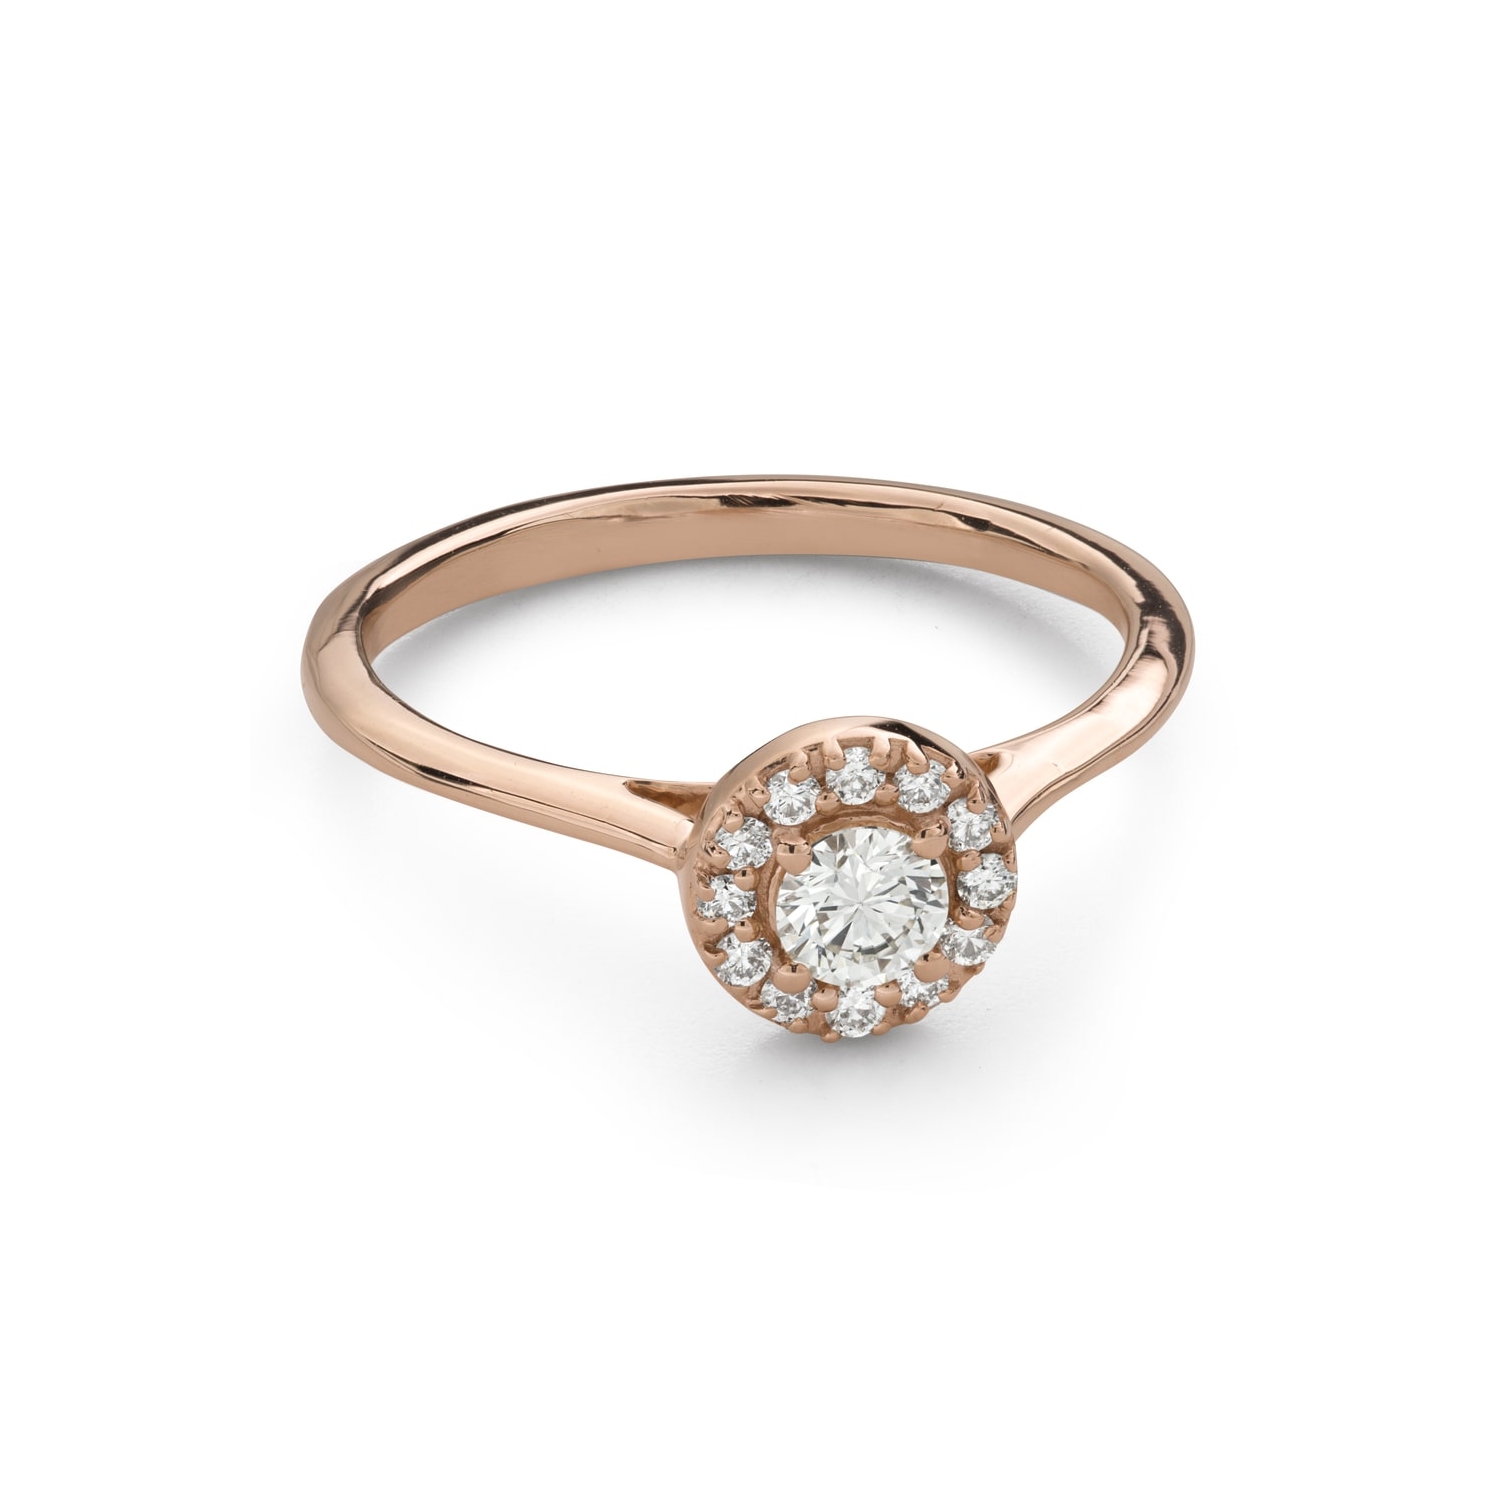 Engagment ring with brilliants "Grace 225"